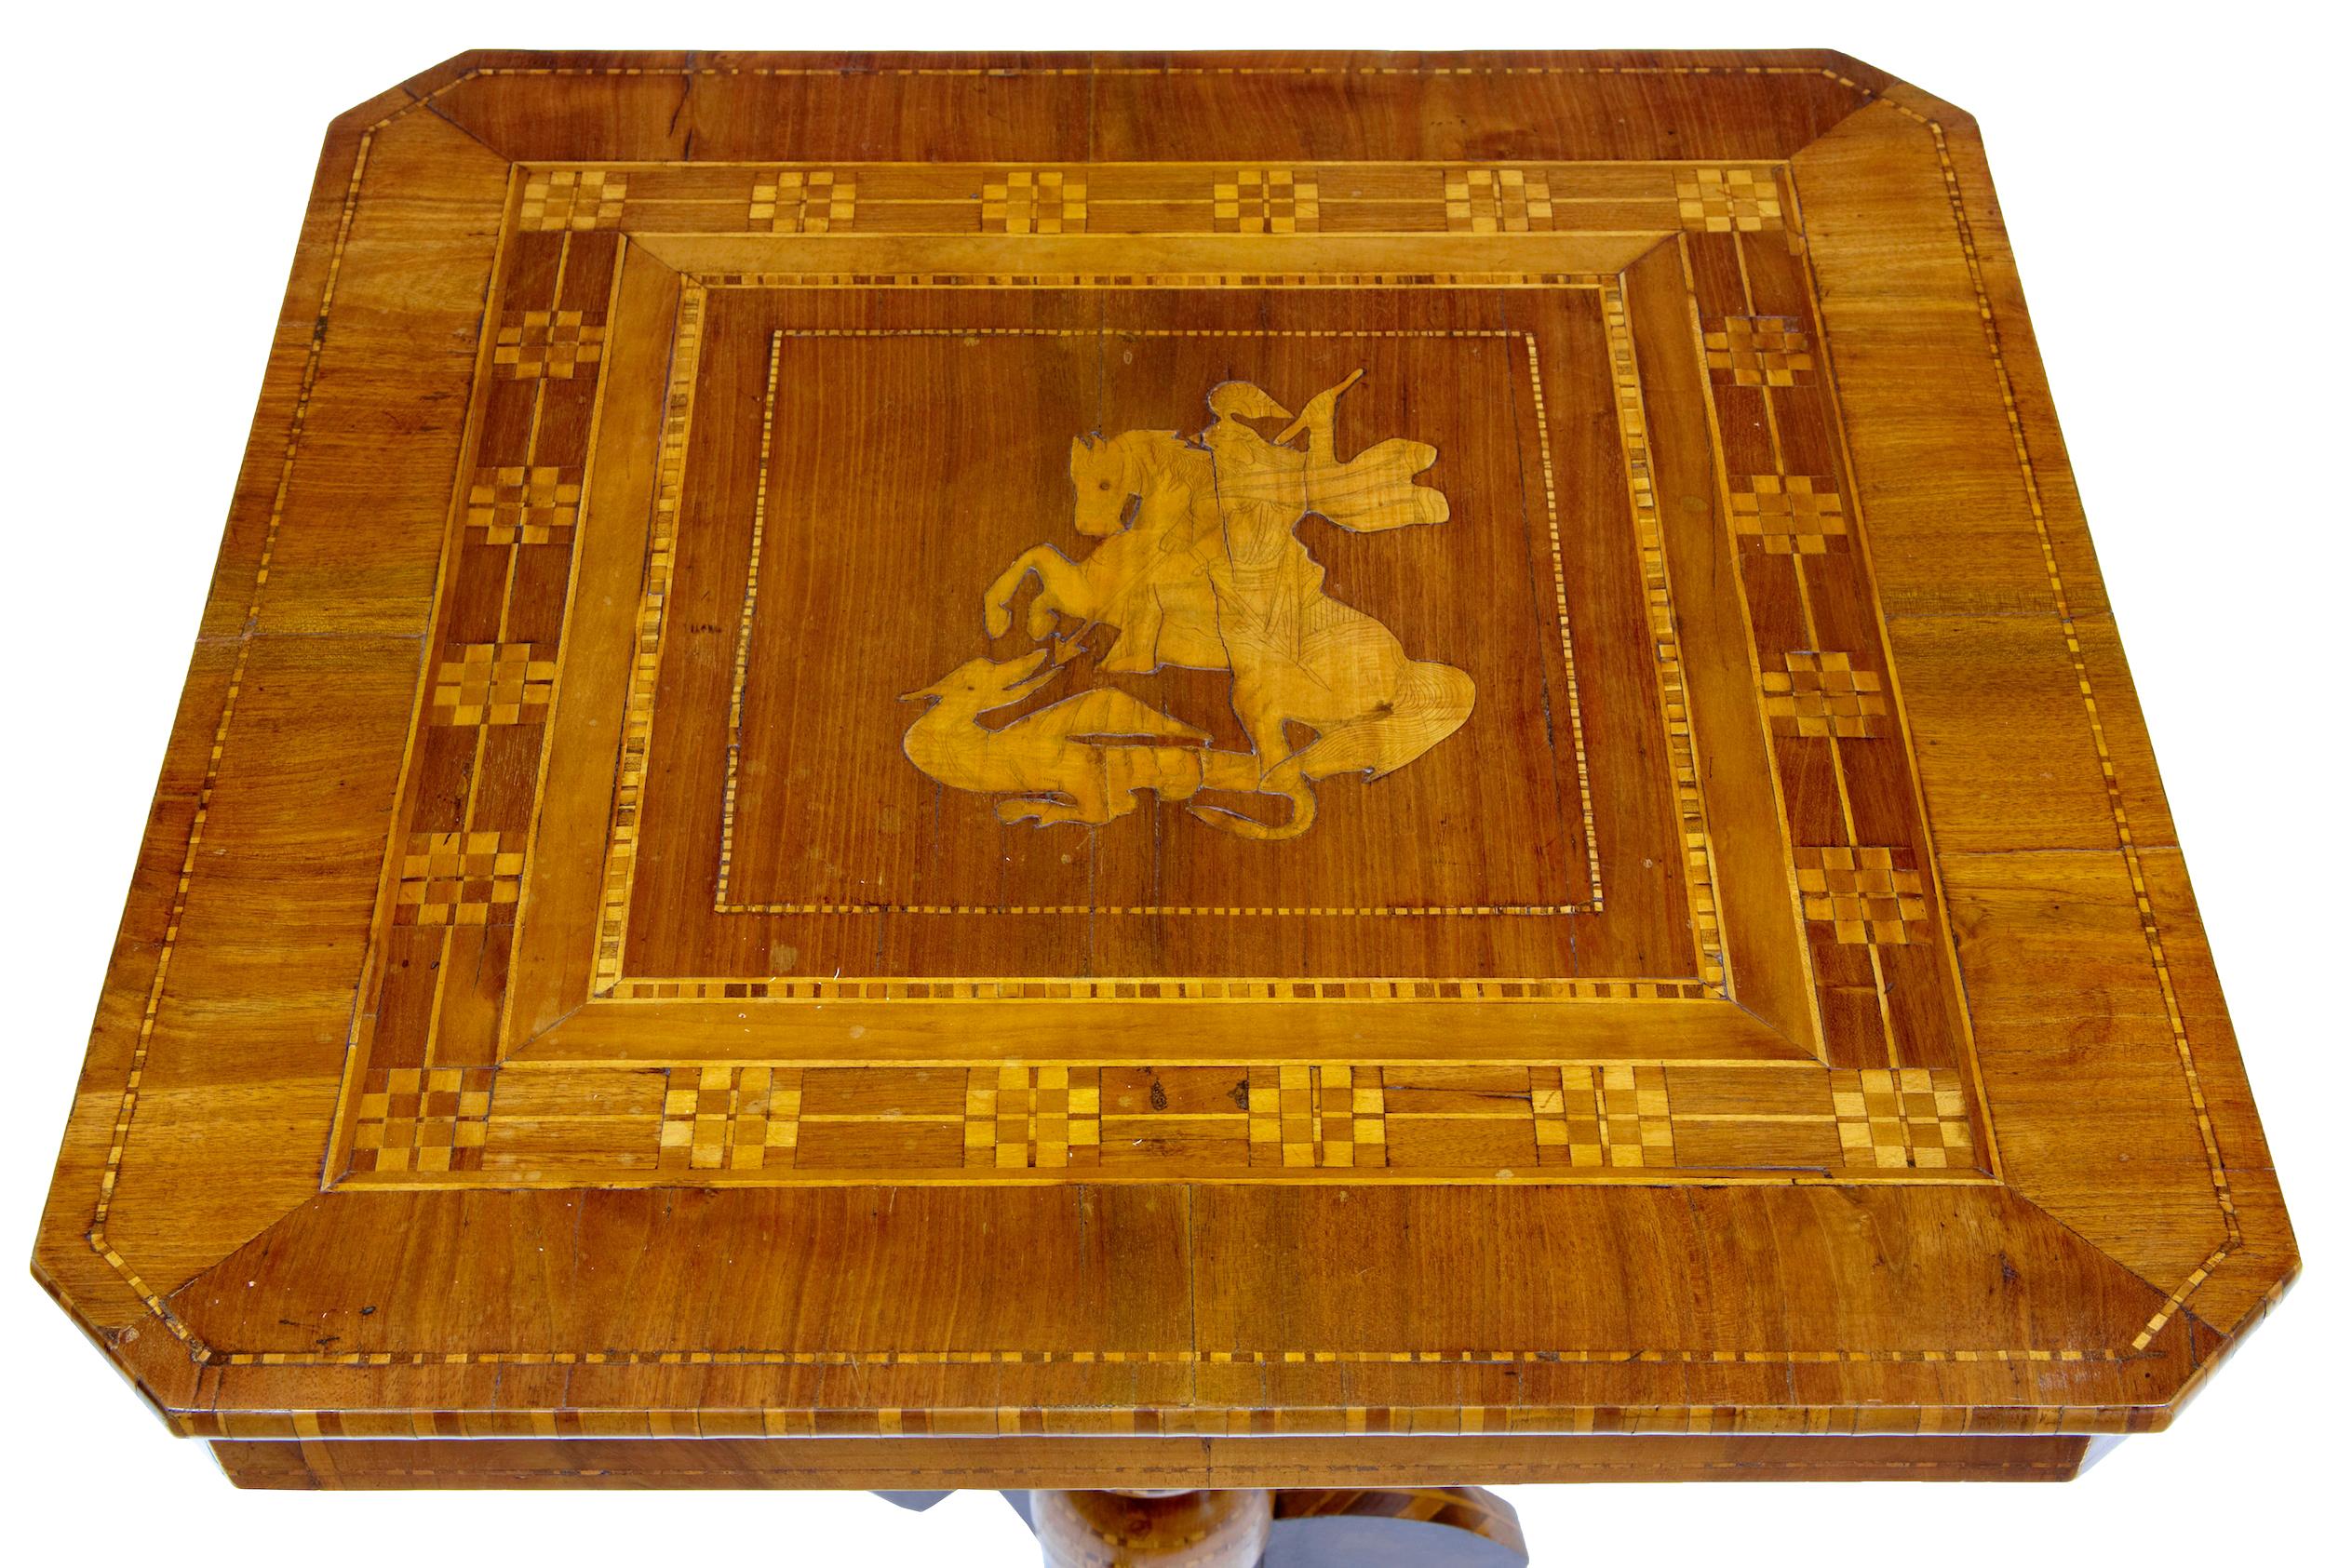 Late 19th century italian walnut sorrento occasional table, circa 1880.

Profusely inlaid italian sorrento table in walnut and olive wood. Square top with canted corners, the top flows with a geometric pattern and depicts george and the dragon in